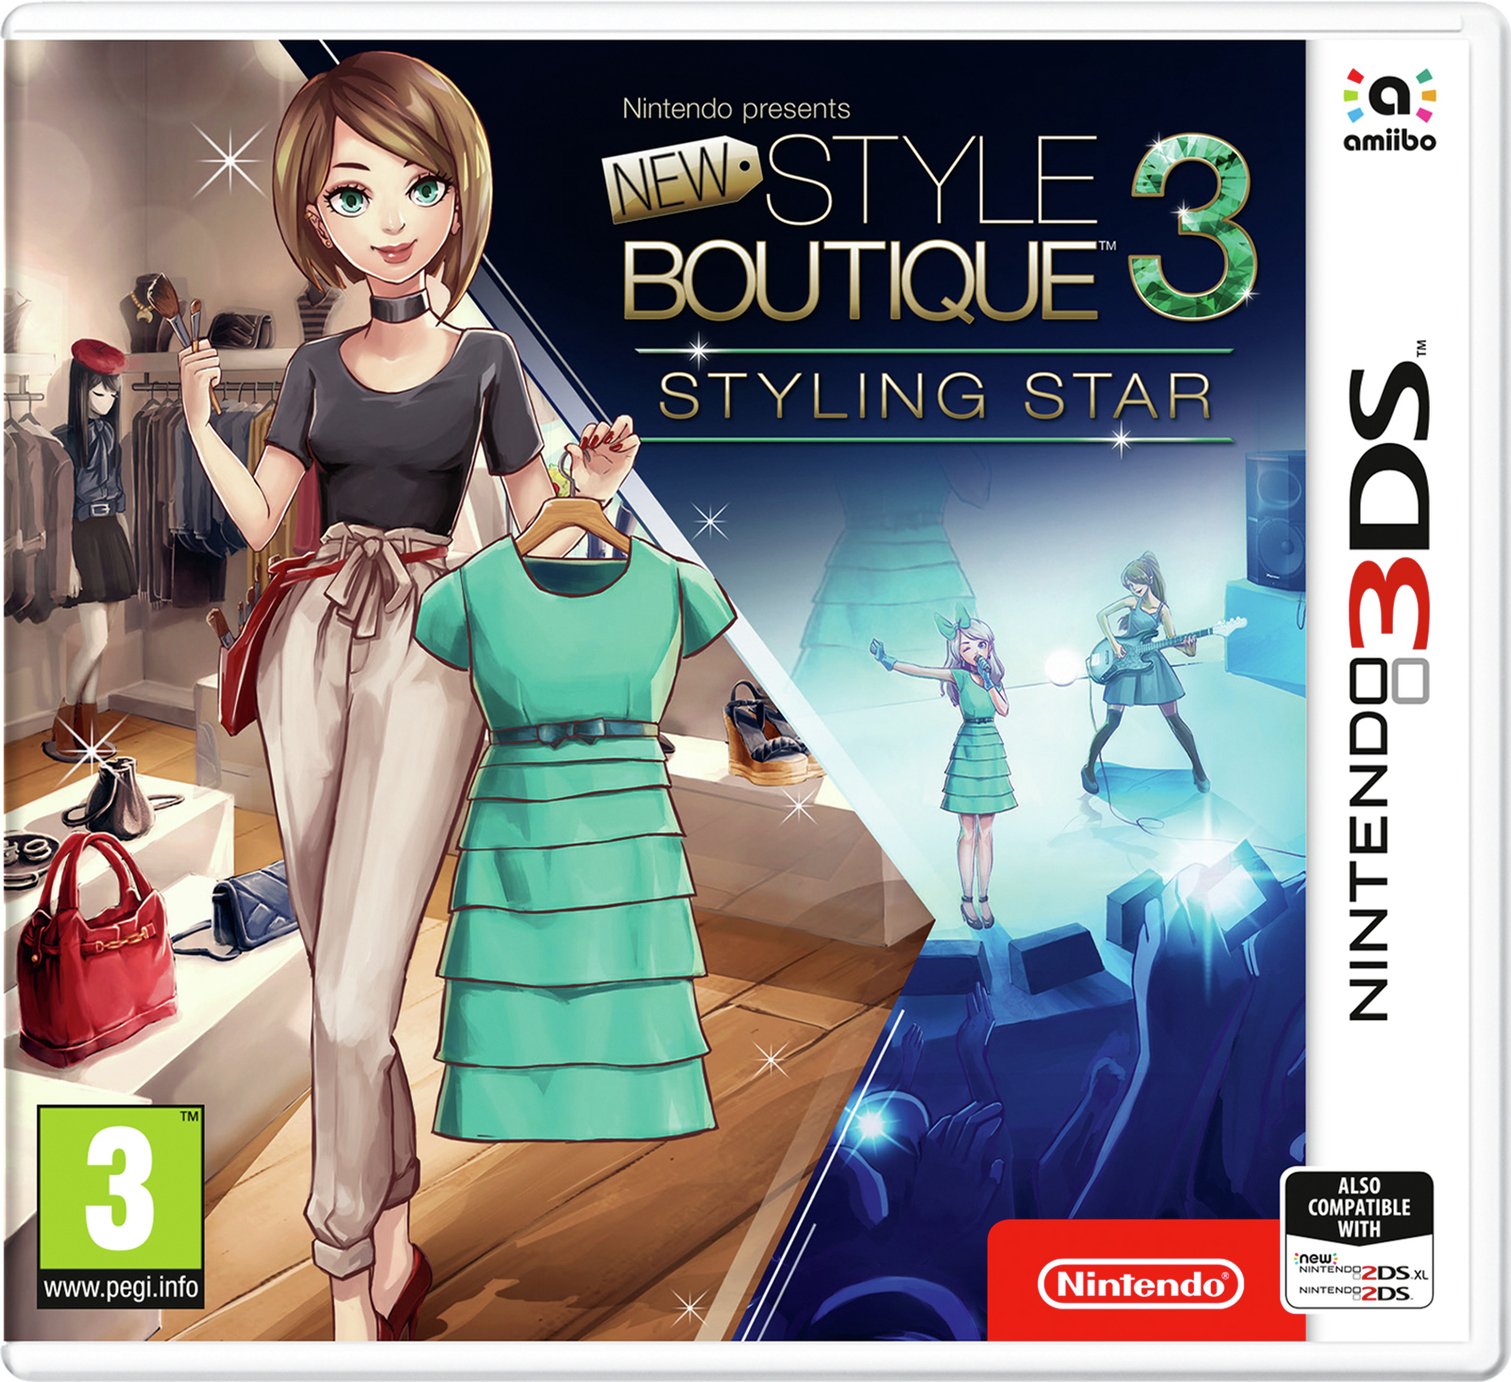 New Style Boutique 3: Styling Star Nintendo 3DS Game Review